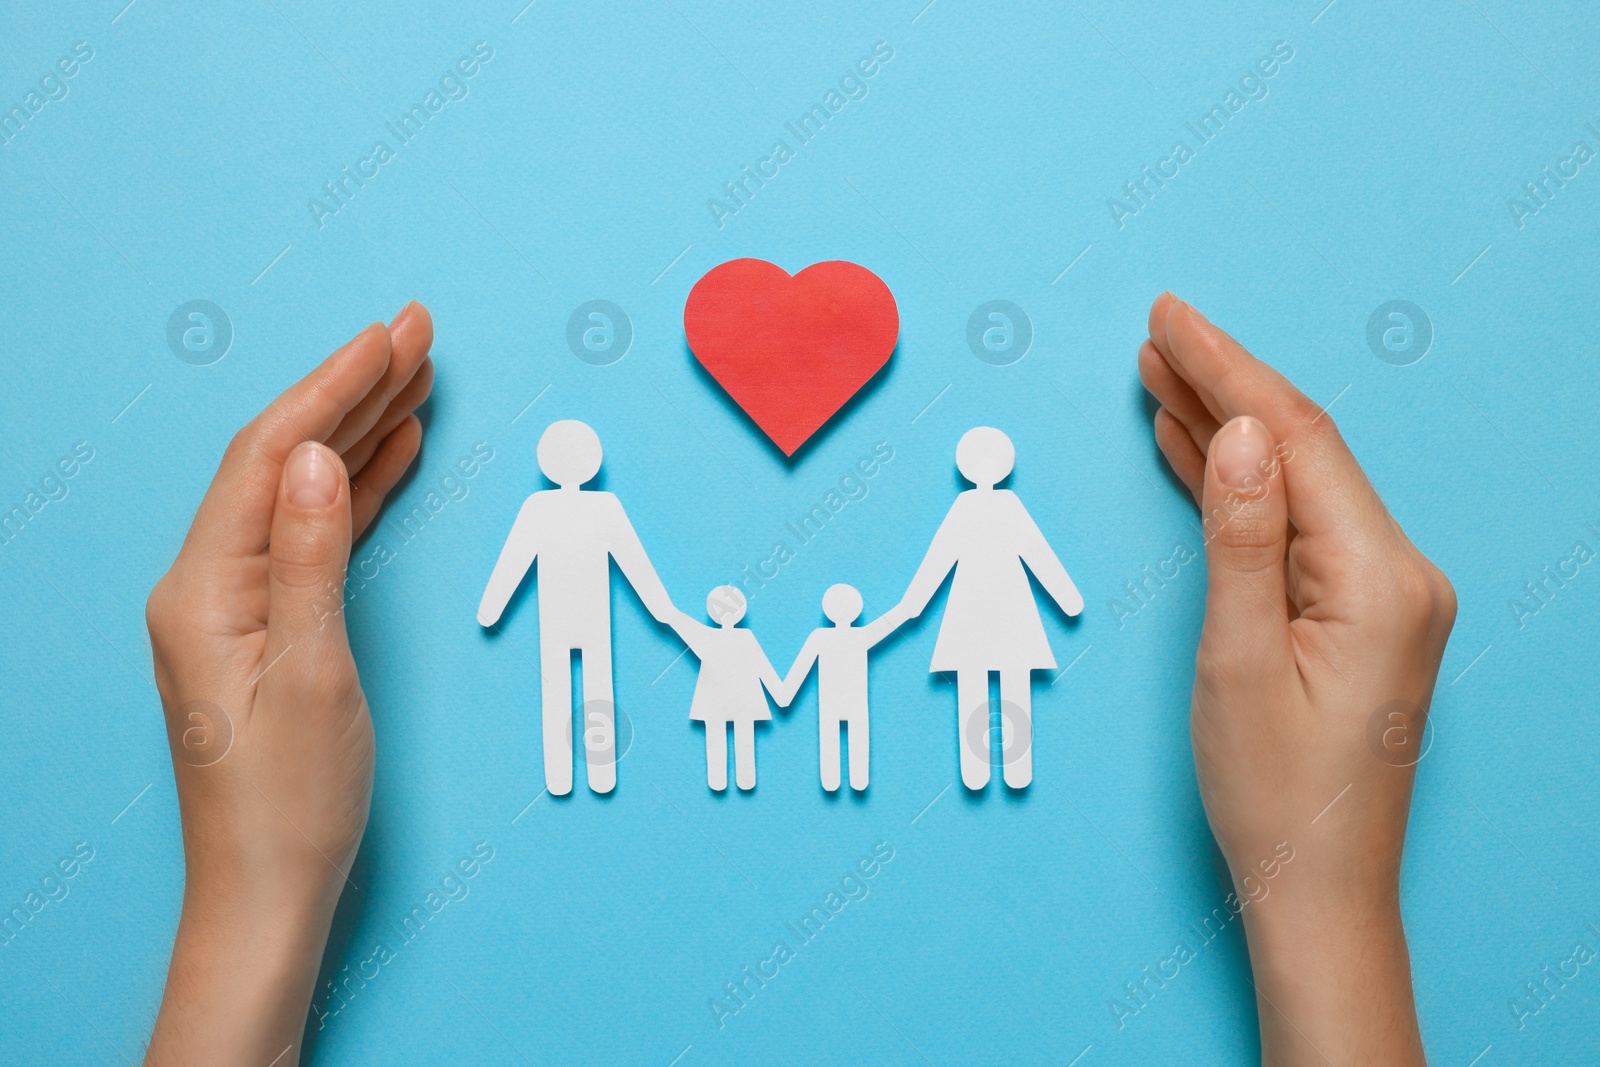 Photo of Woman protecting paper family figures and red heart on light blue background, top view. Insurance concept